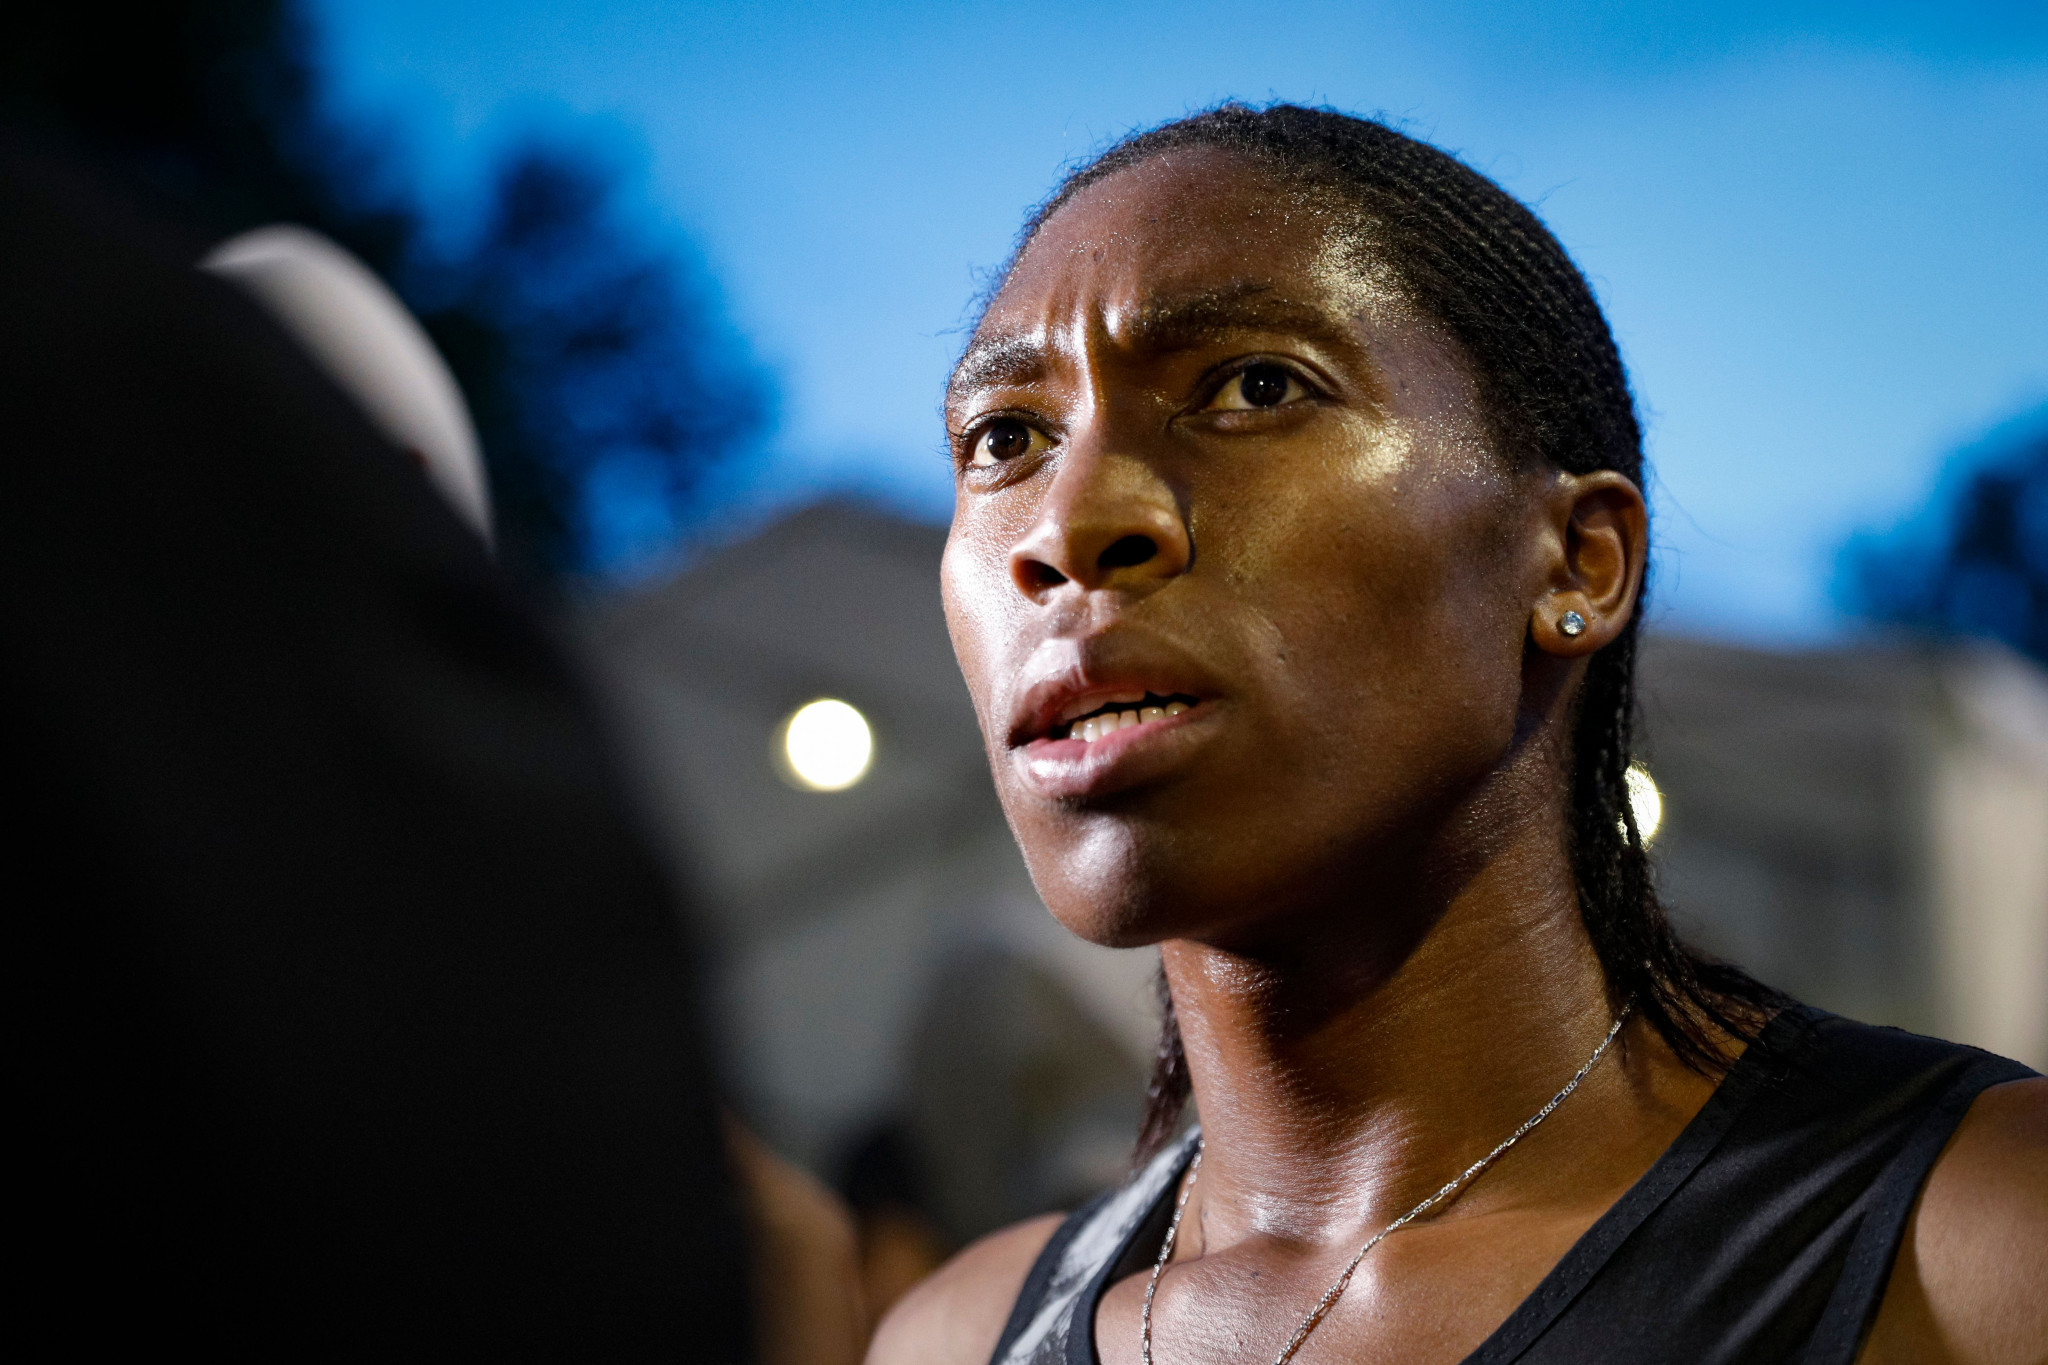 Caster Semenya is among the athletes impacted by World Athletics' DSD regulations ©Getty Images